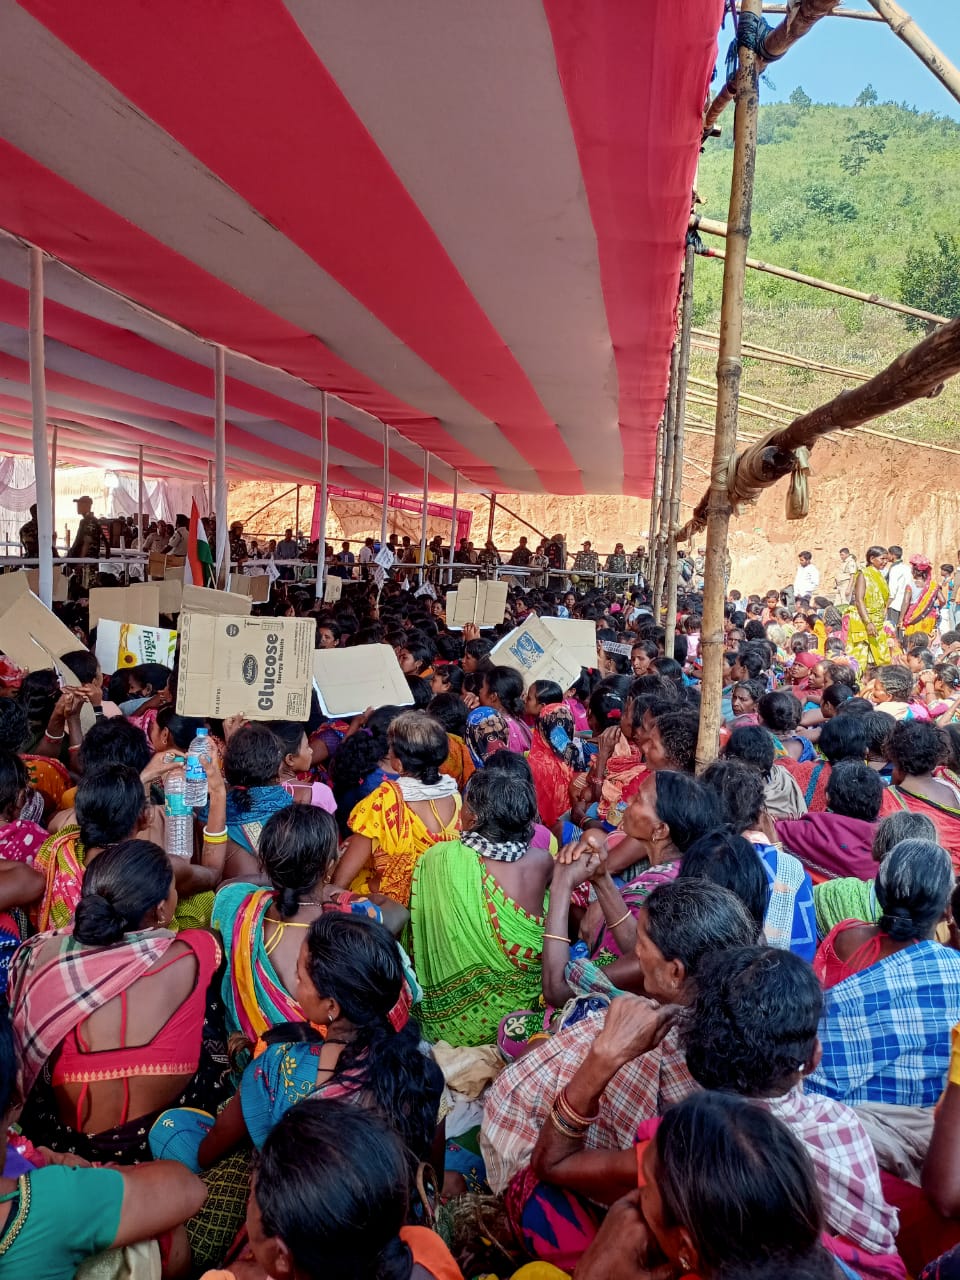 The tribals protesting against the mining during the public hearing